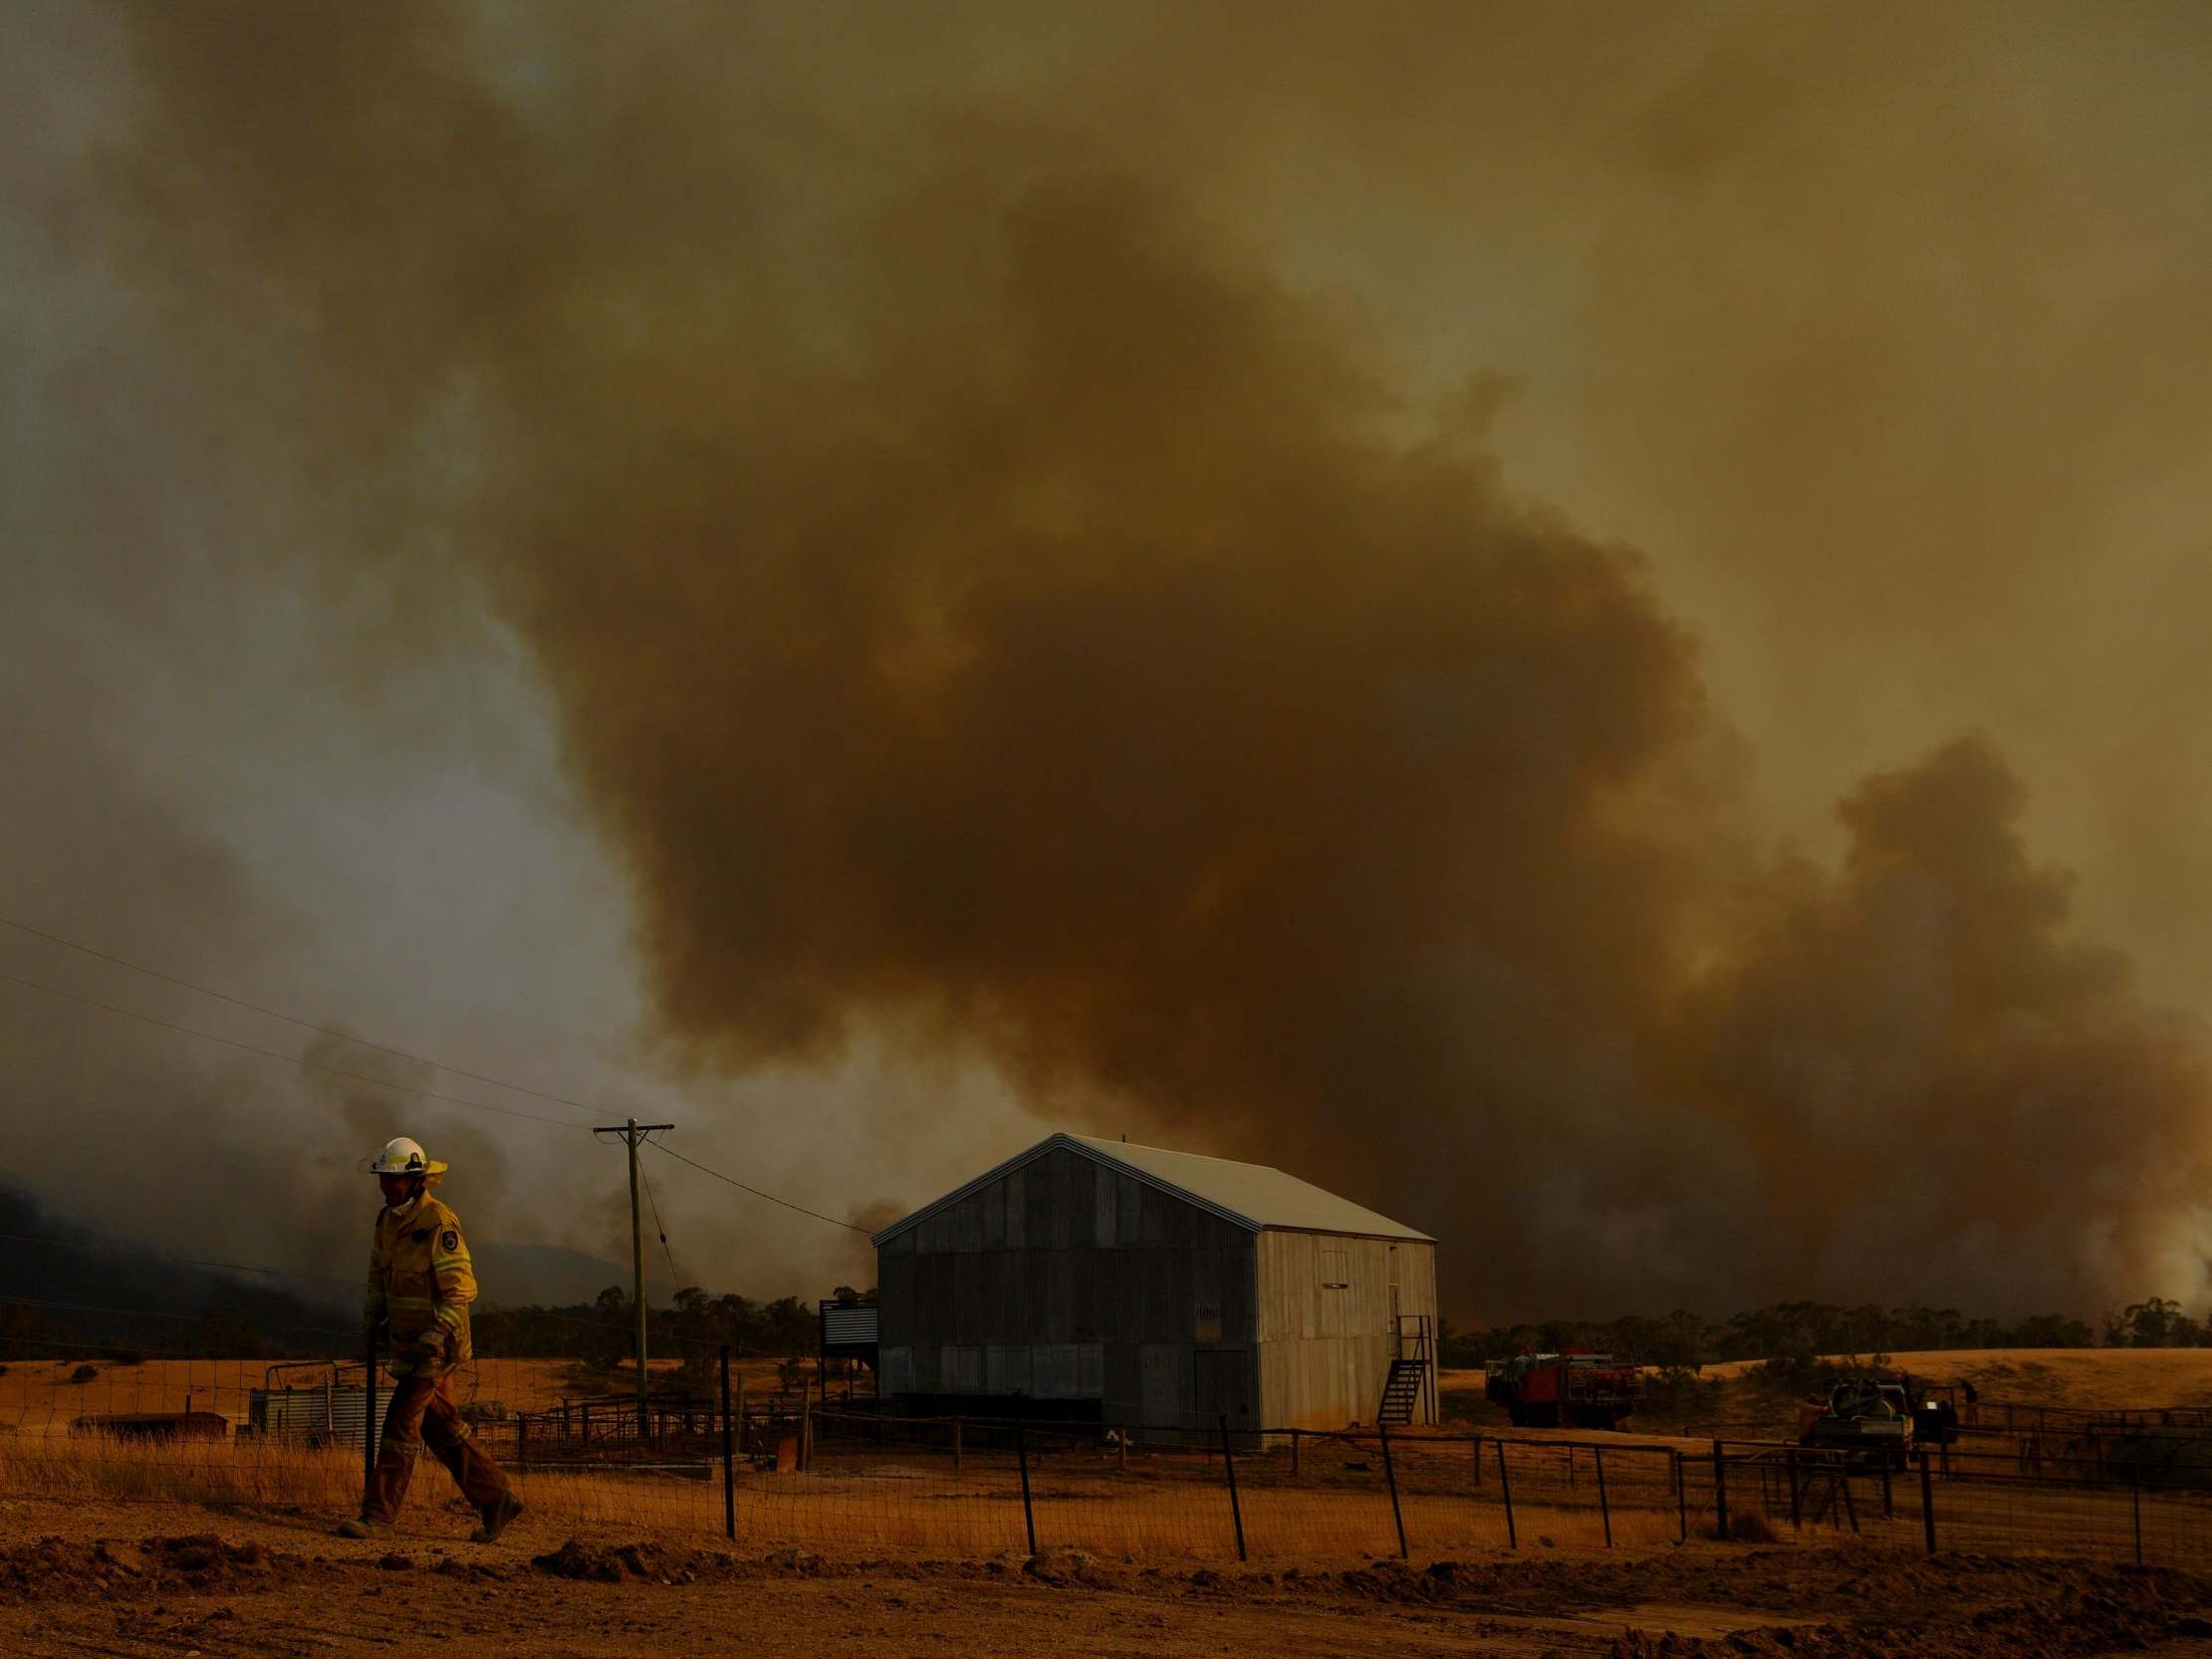 Smoke rises from a fire in Tumburumba, Australia, where bush blazes have been raging across the country